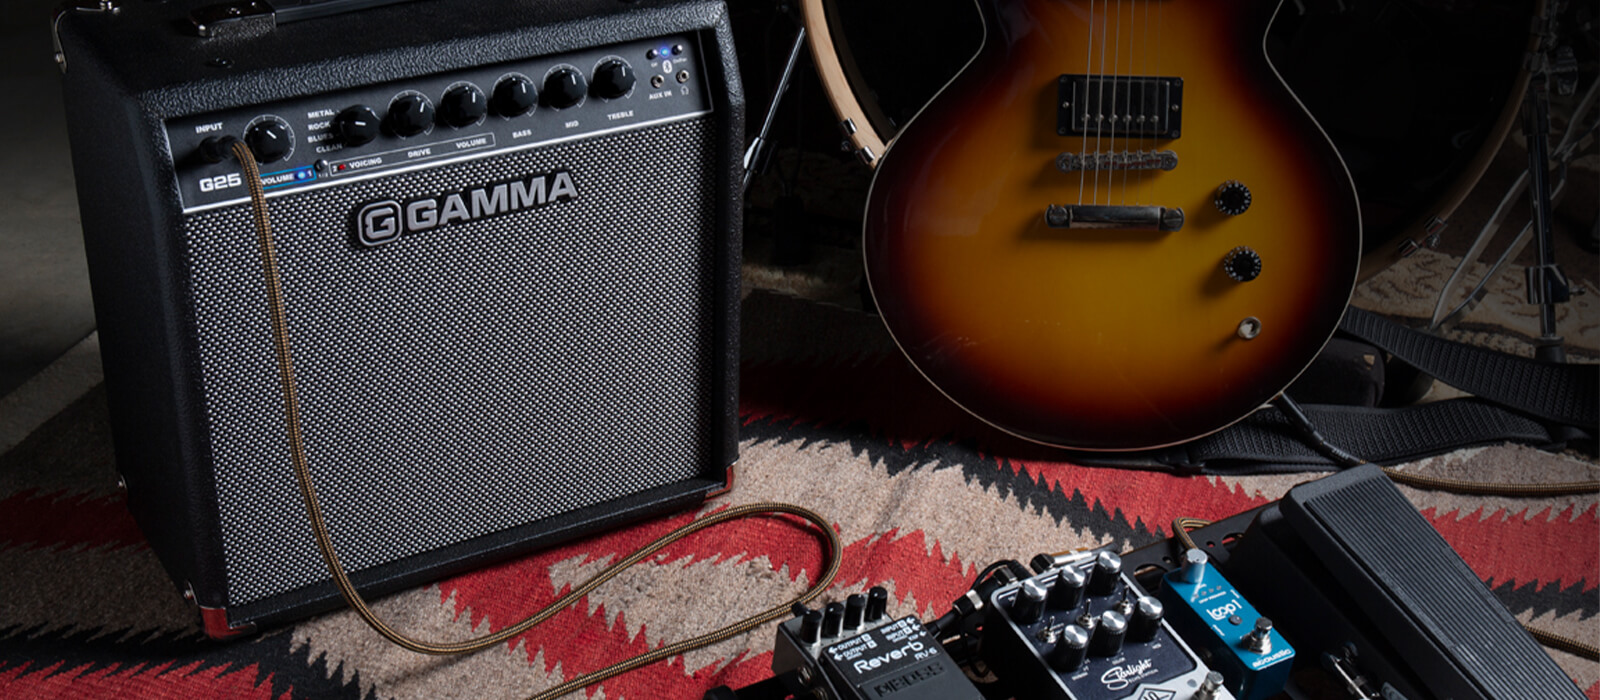 GAMMA G25 guitar amp hooked up to guitar pedals next to guitar